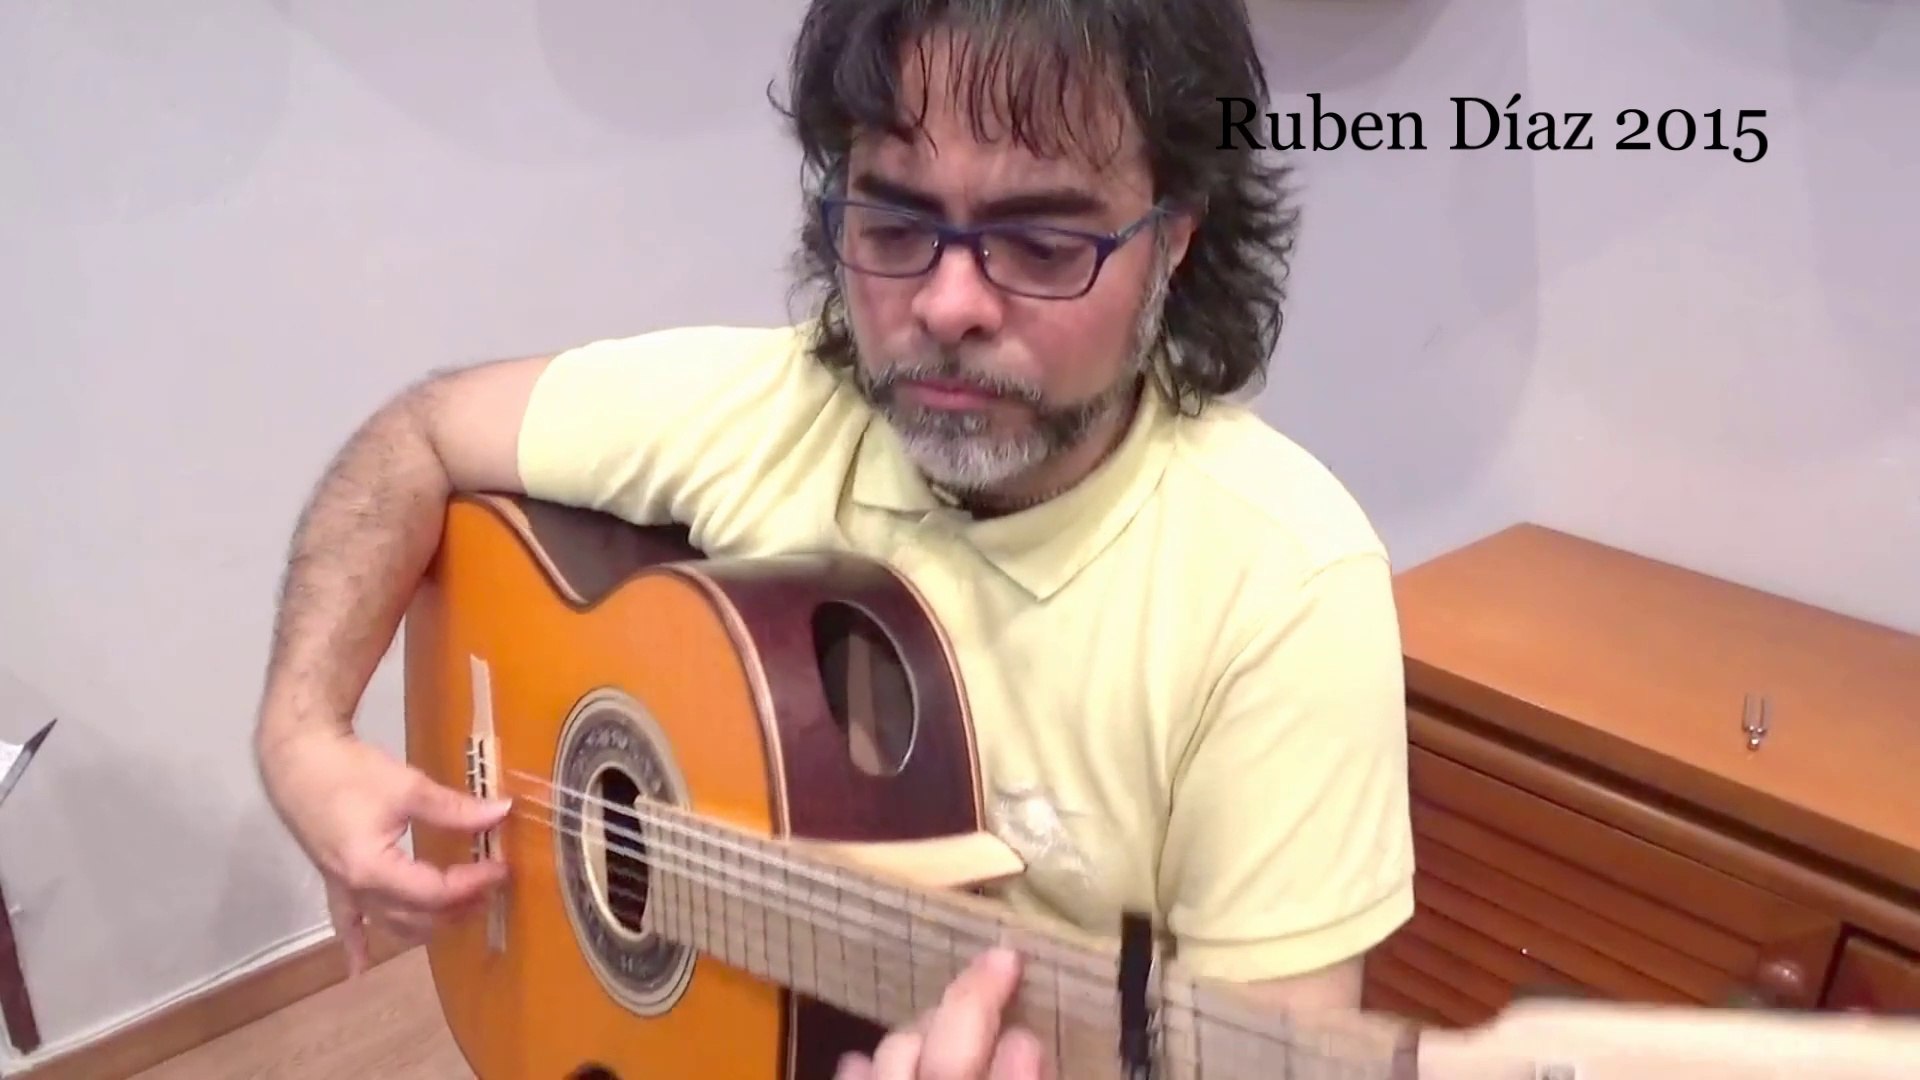 Pandora's box of Spanish flamenco guitars and luthiers / Difference between  Modern and Old fashioned classical flamenco guitars / Post-Paco de Lucia's  Period in Andalusian Flamenco Guitars New Generation 2015 / Endorsed